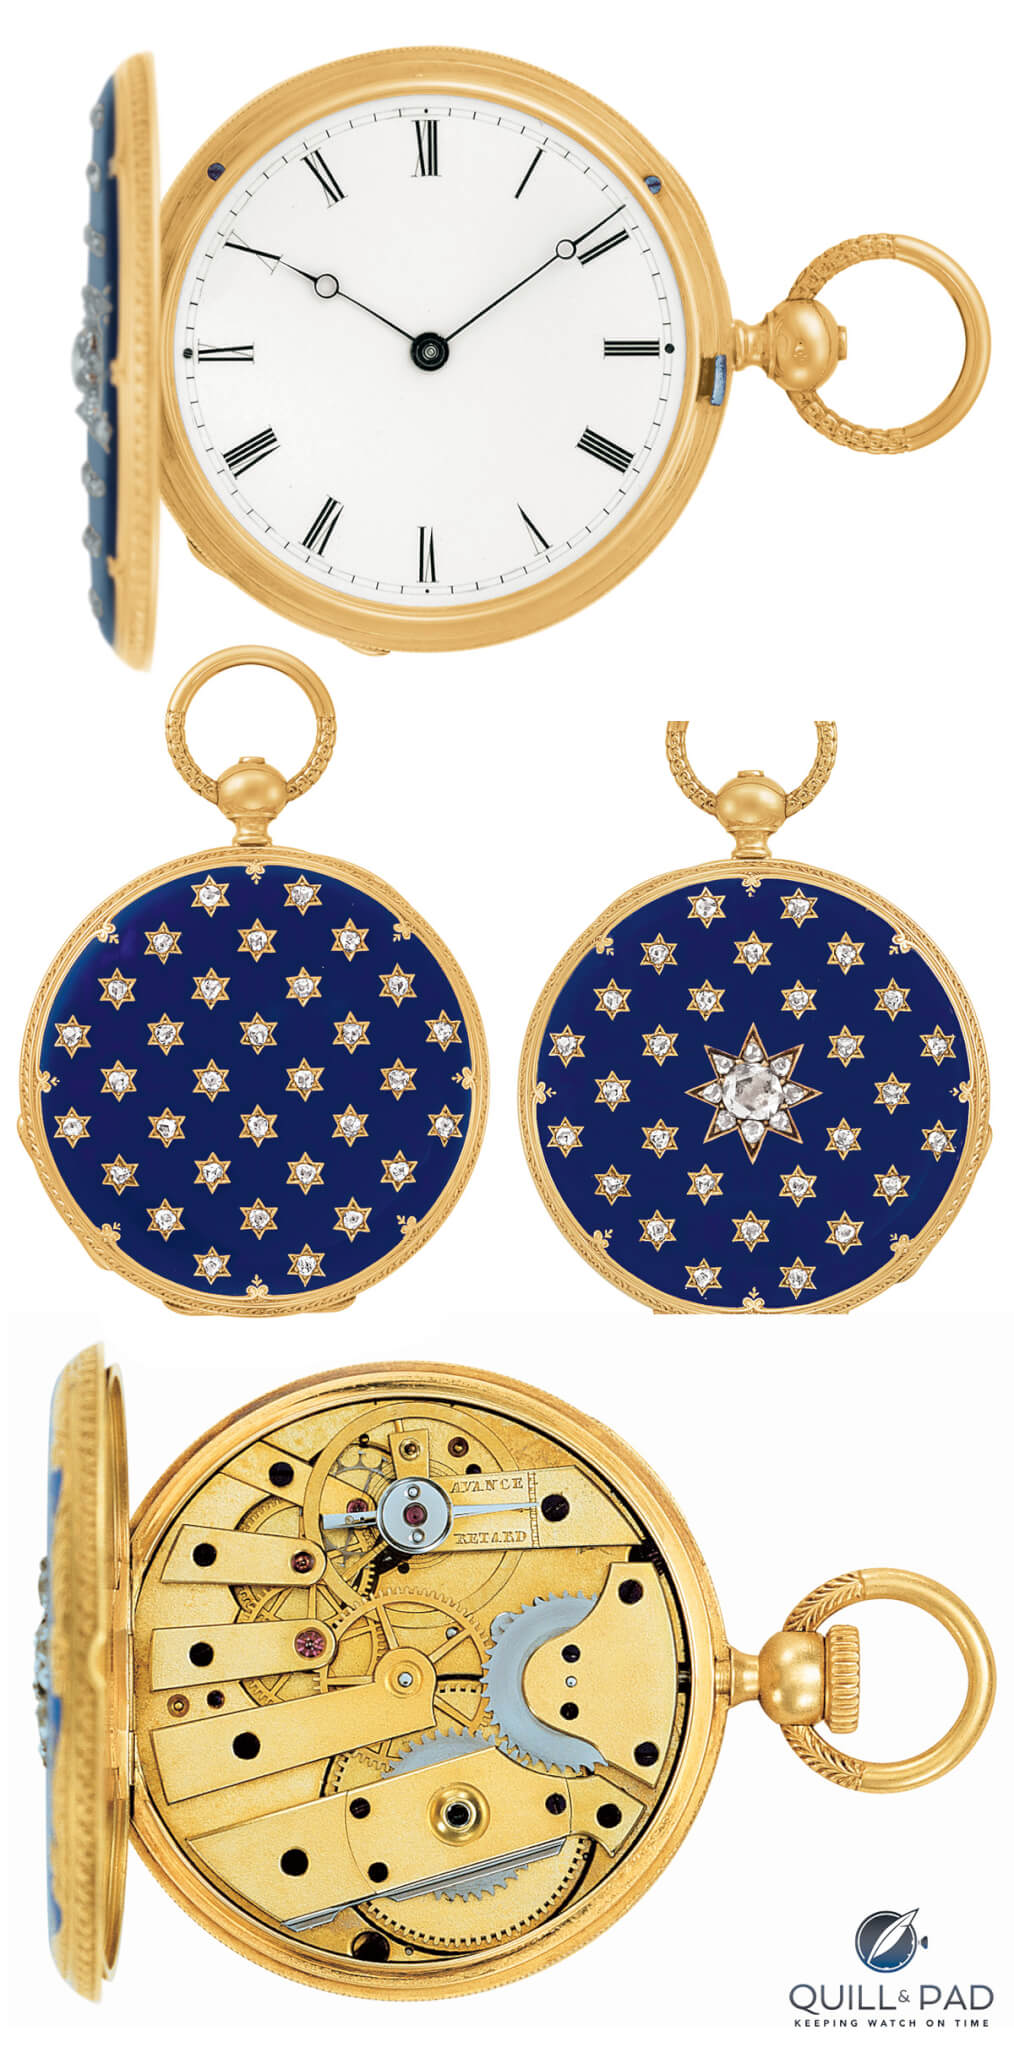 A Patek Philippe pendant watch for Tiffany & Co. no. 4740 from 1852